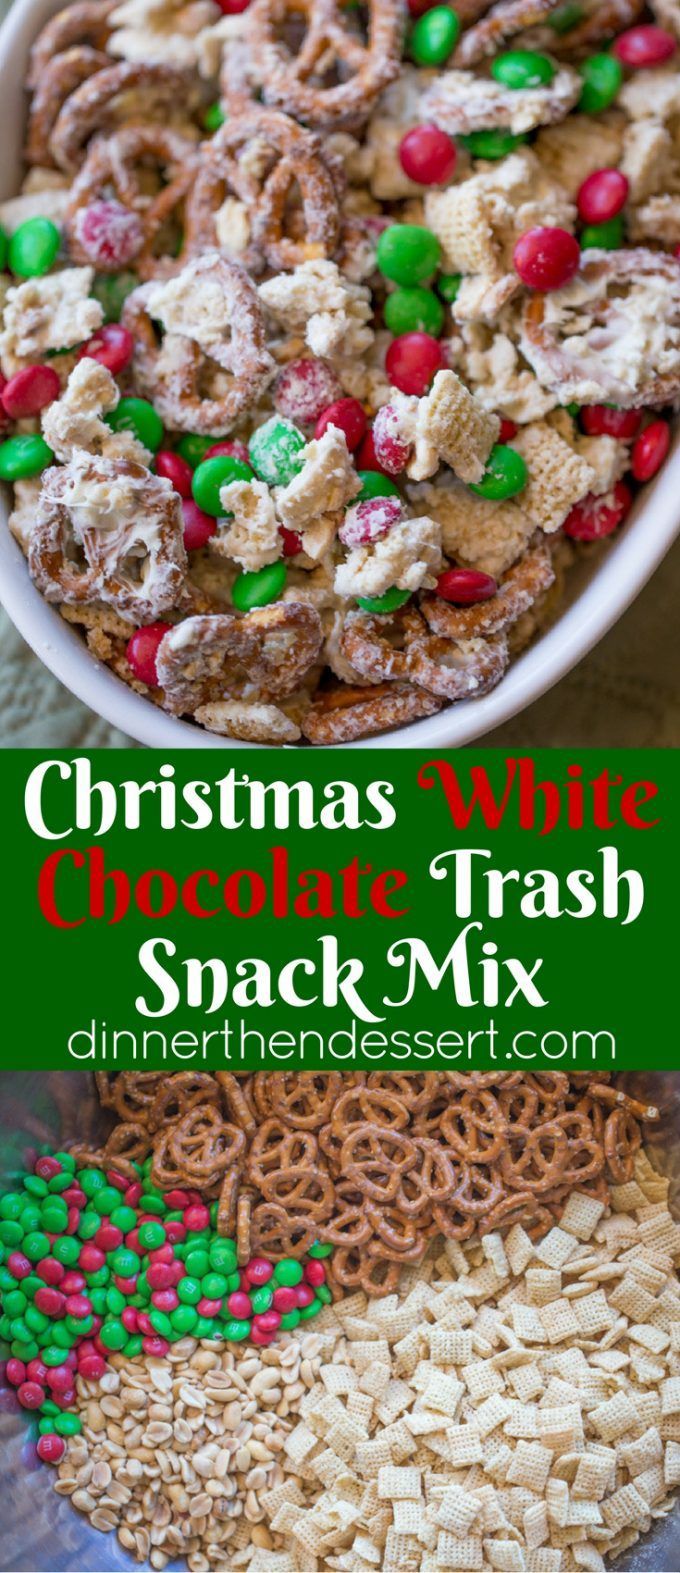 Christmas White Chocolate Trash Snack Mix with pretzels, cereal, peanuts and choco